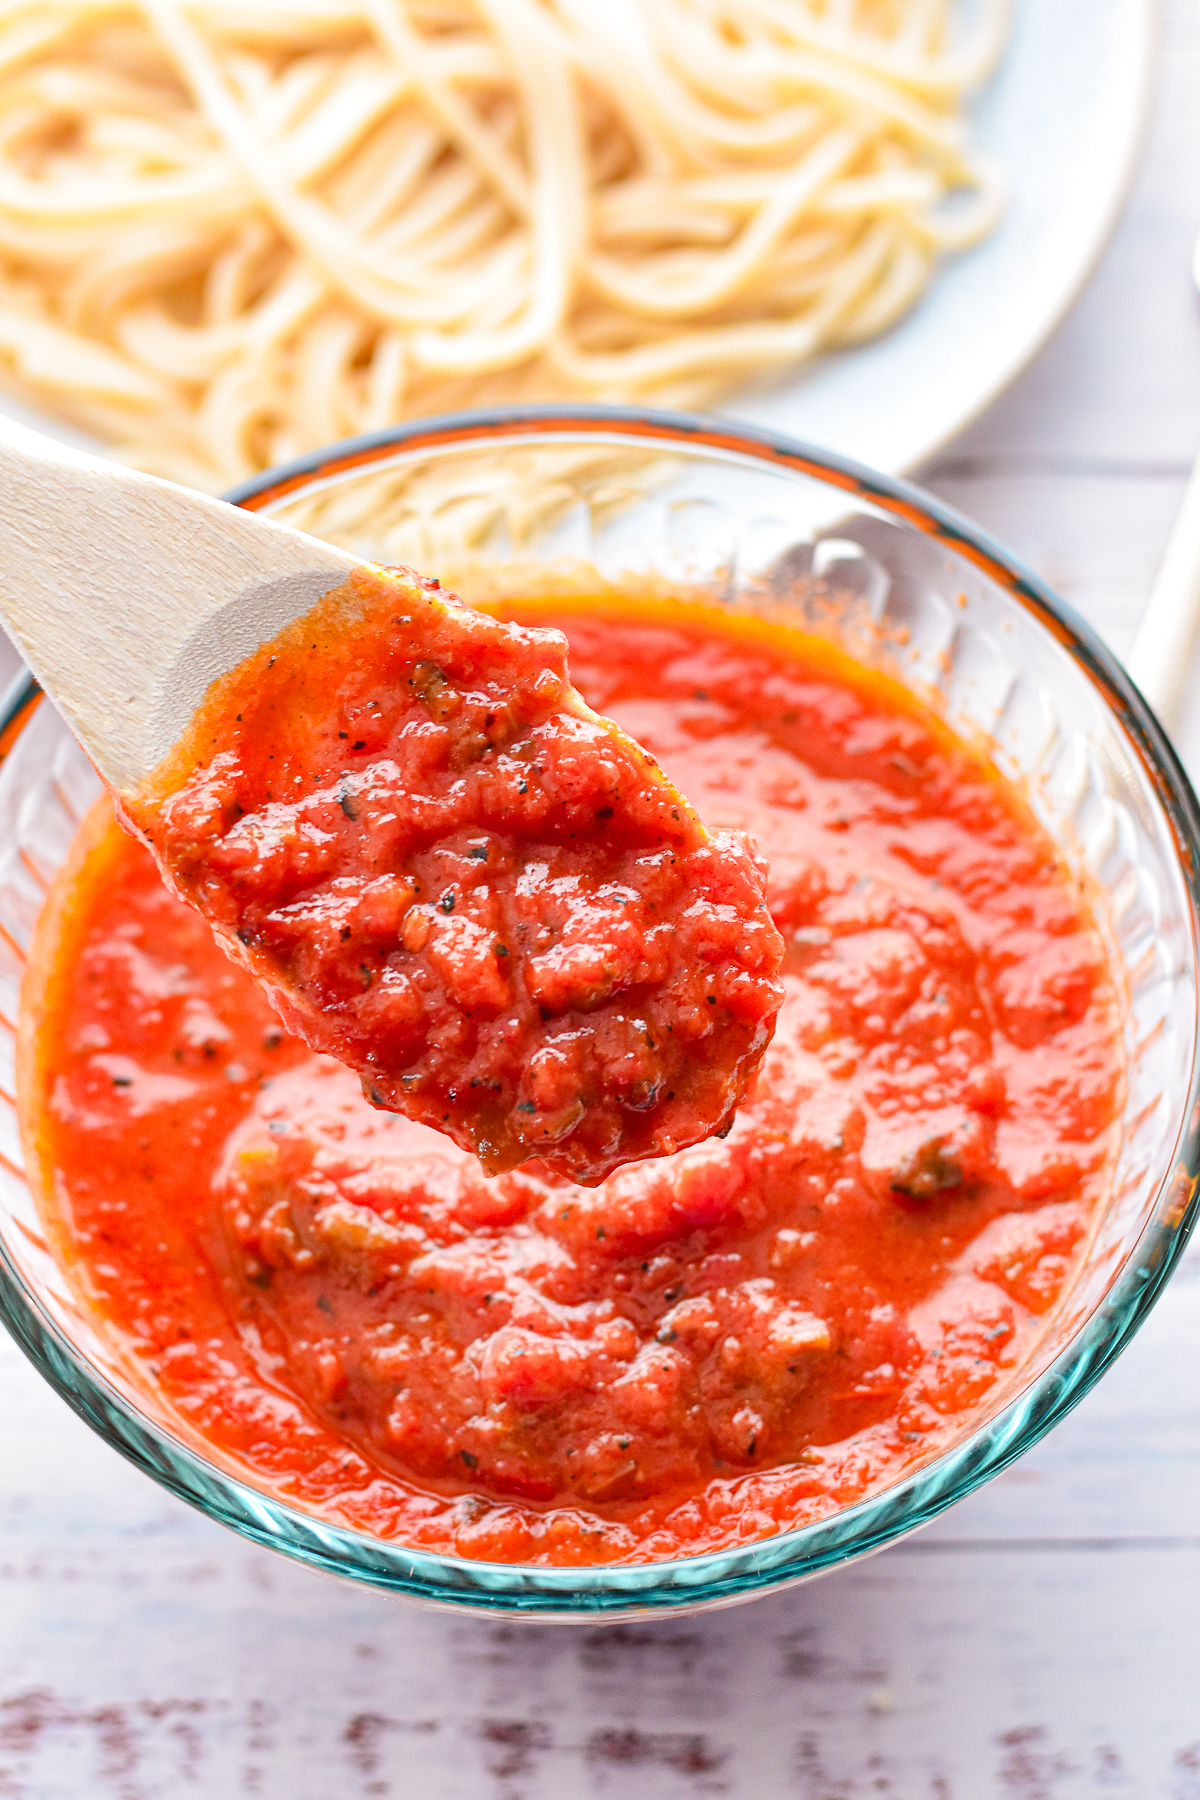 a wooden spoon covered in low fodmap spaghetti sauce over a bowl of sauce in front of a plate of low FODMAP spaghetti.